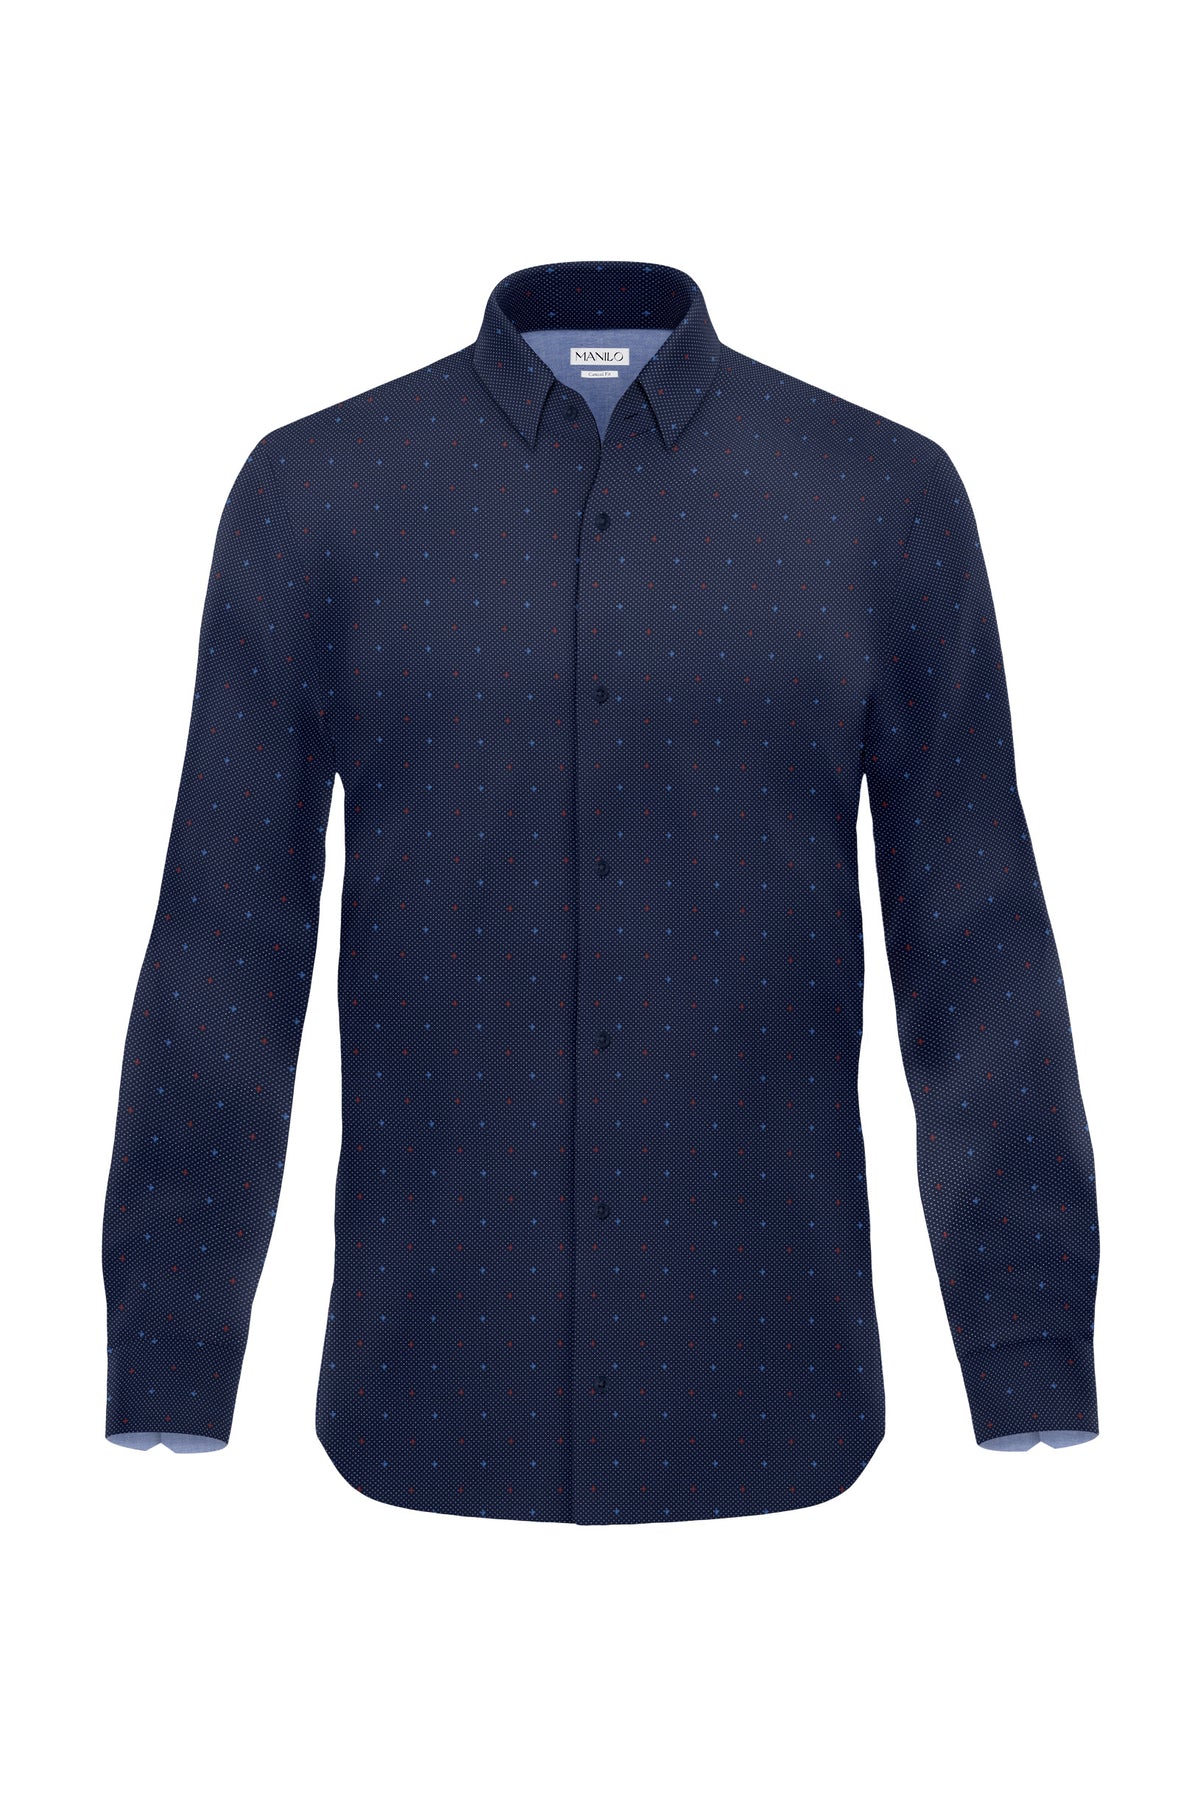 Casual shirt with graphic pattern in navy (Art. 2234-C)